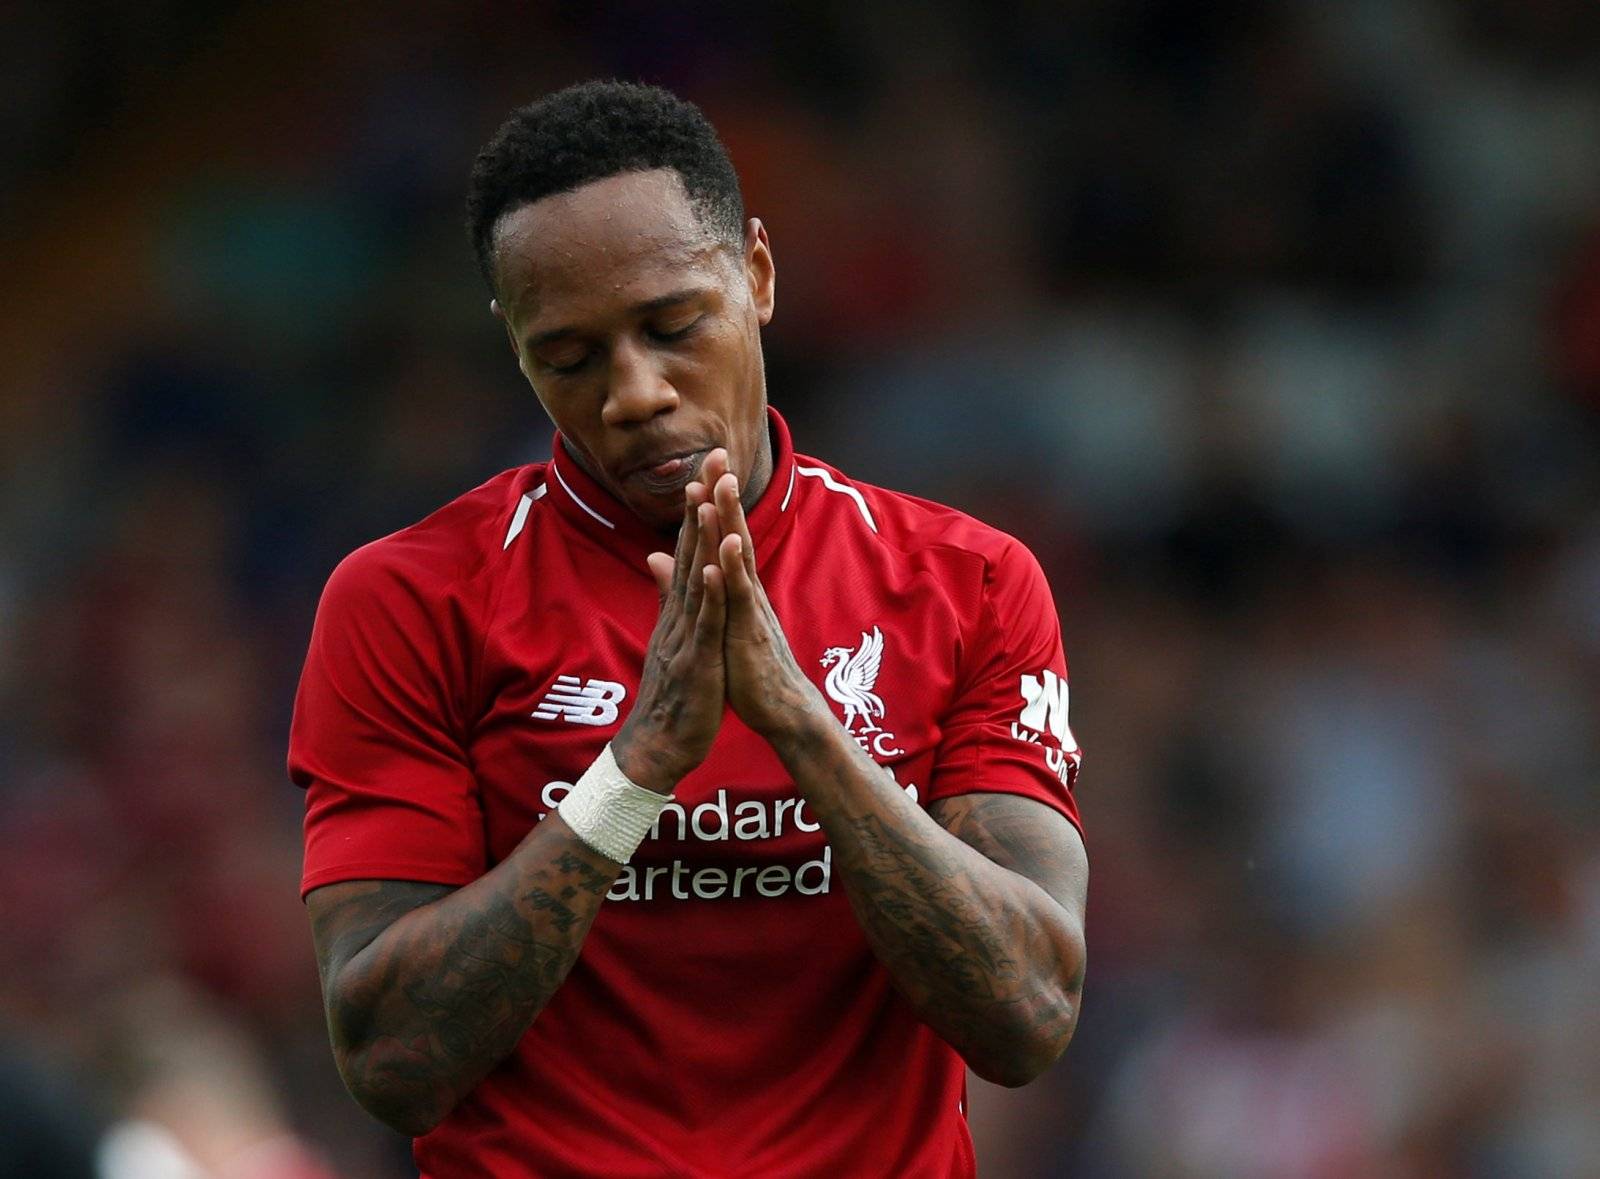 Crystal Palace: Fans react as video shows Nathaniel Clyne training at the club - Crystal Palace